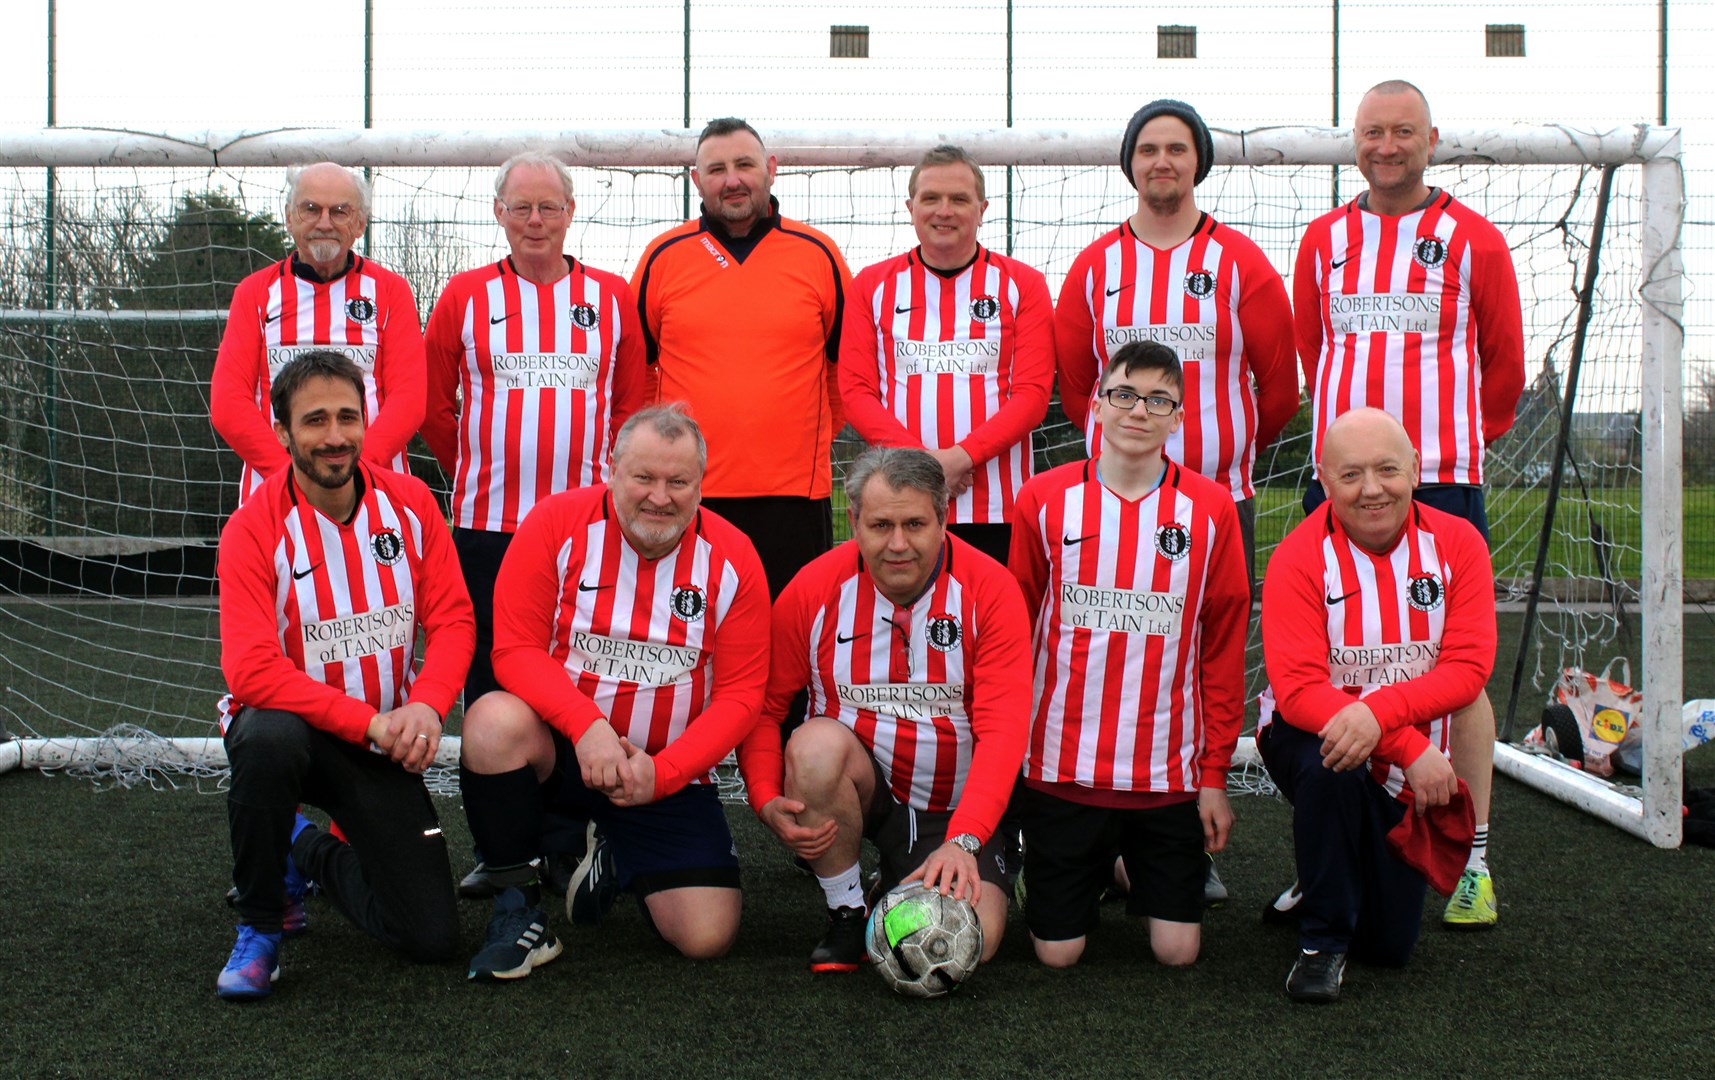 St Duthus walking football club members, who held their first formal meeting on April 15.